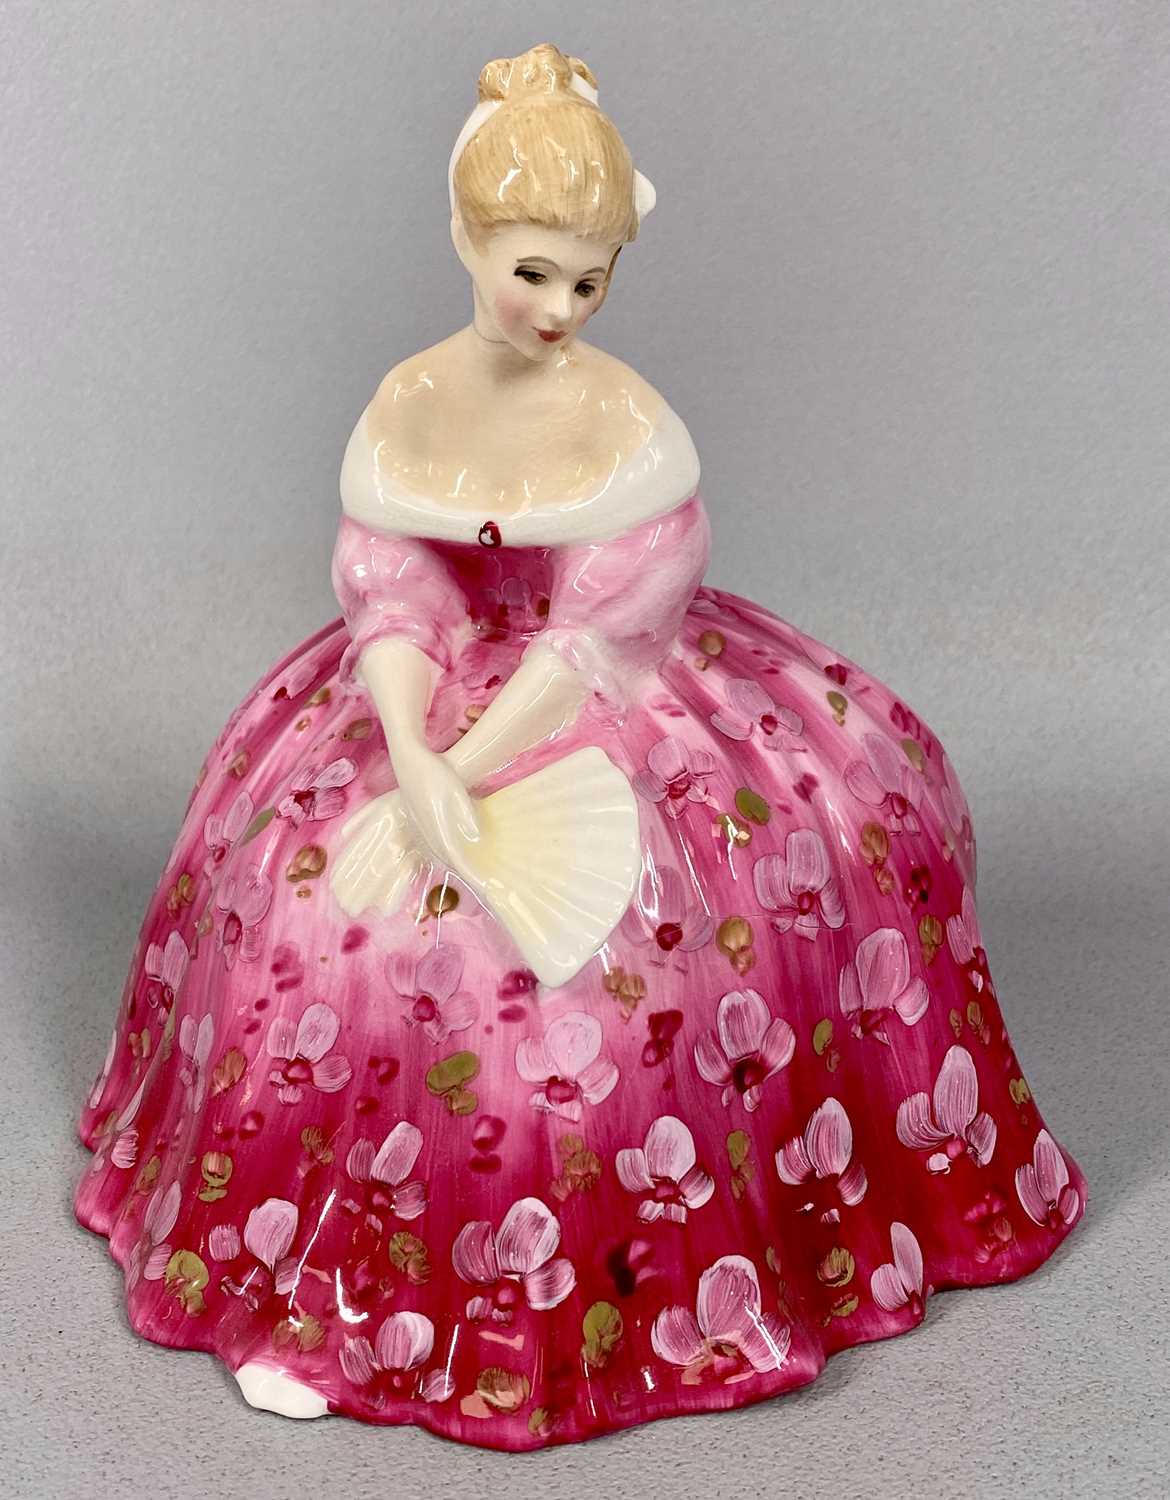 FIVE ROYAL DOULTON LADY FIGURINES, Victoria HN2471, Adrienne HN2304, Michelle HN2234, Vanity - Image 4 of 5